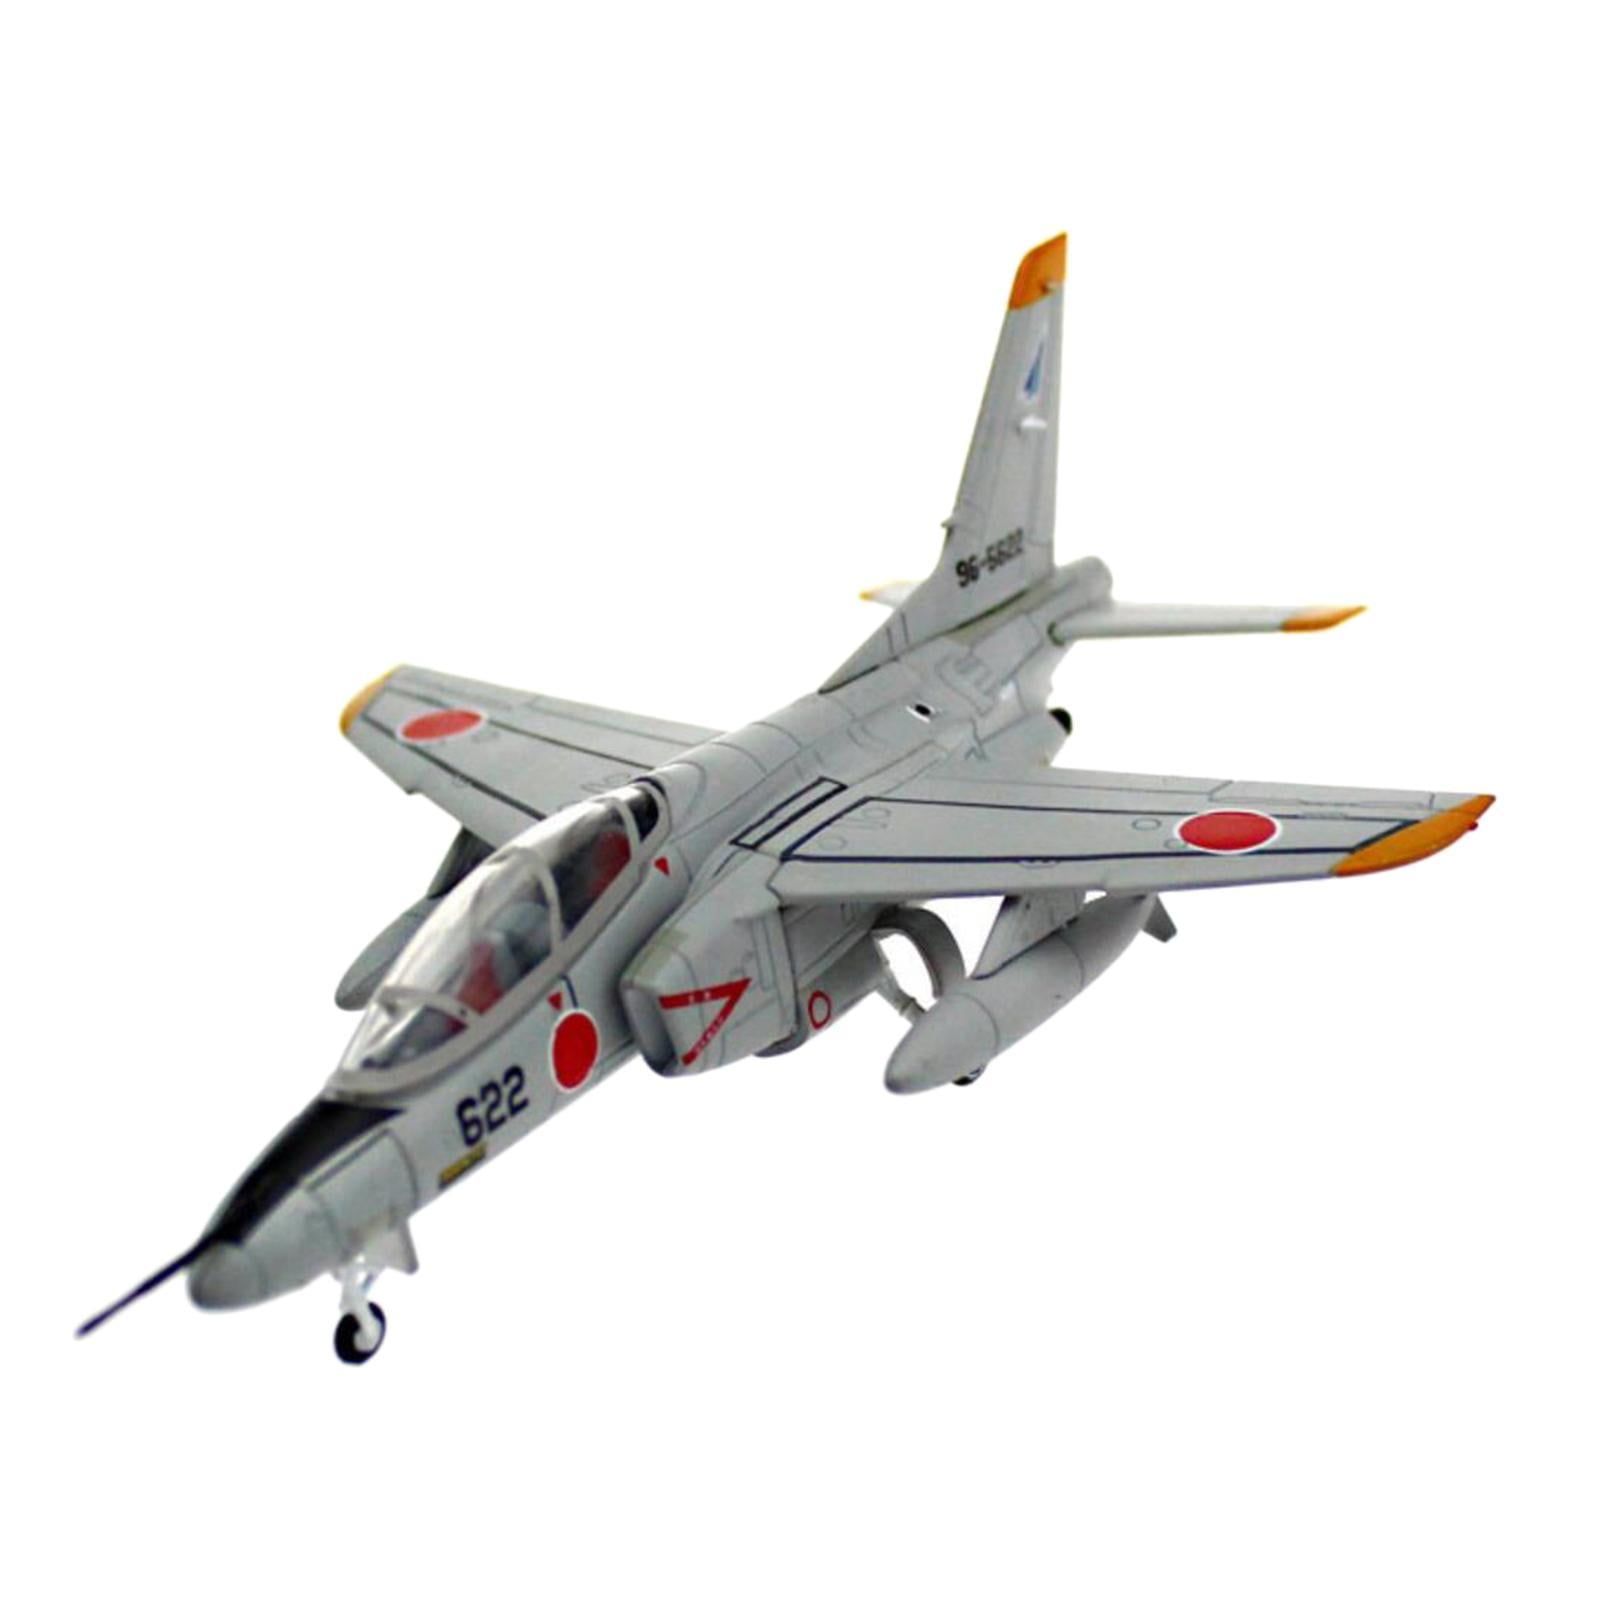 Modern Plane Fighter Airplane Aircraft Model Home Decoration Ornament Toy 1pc 